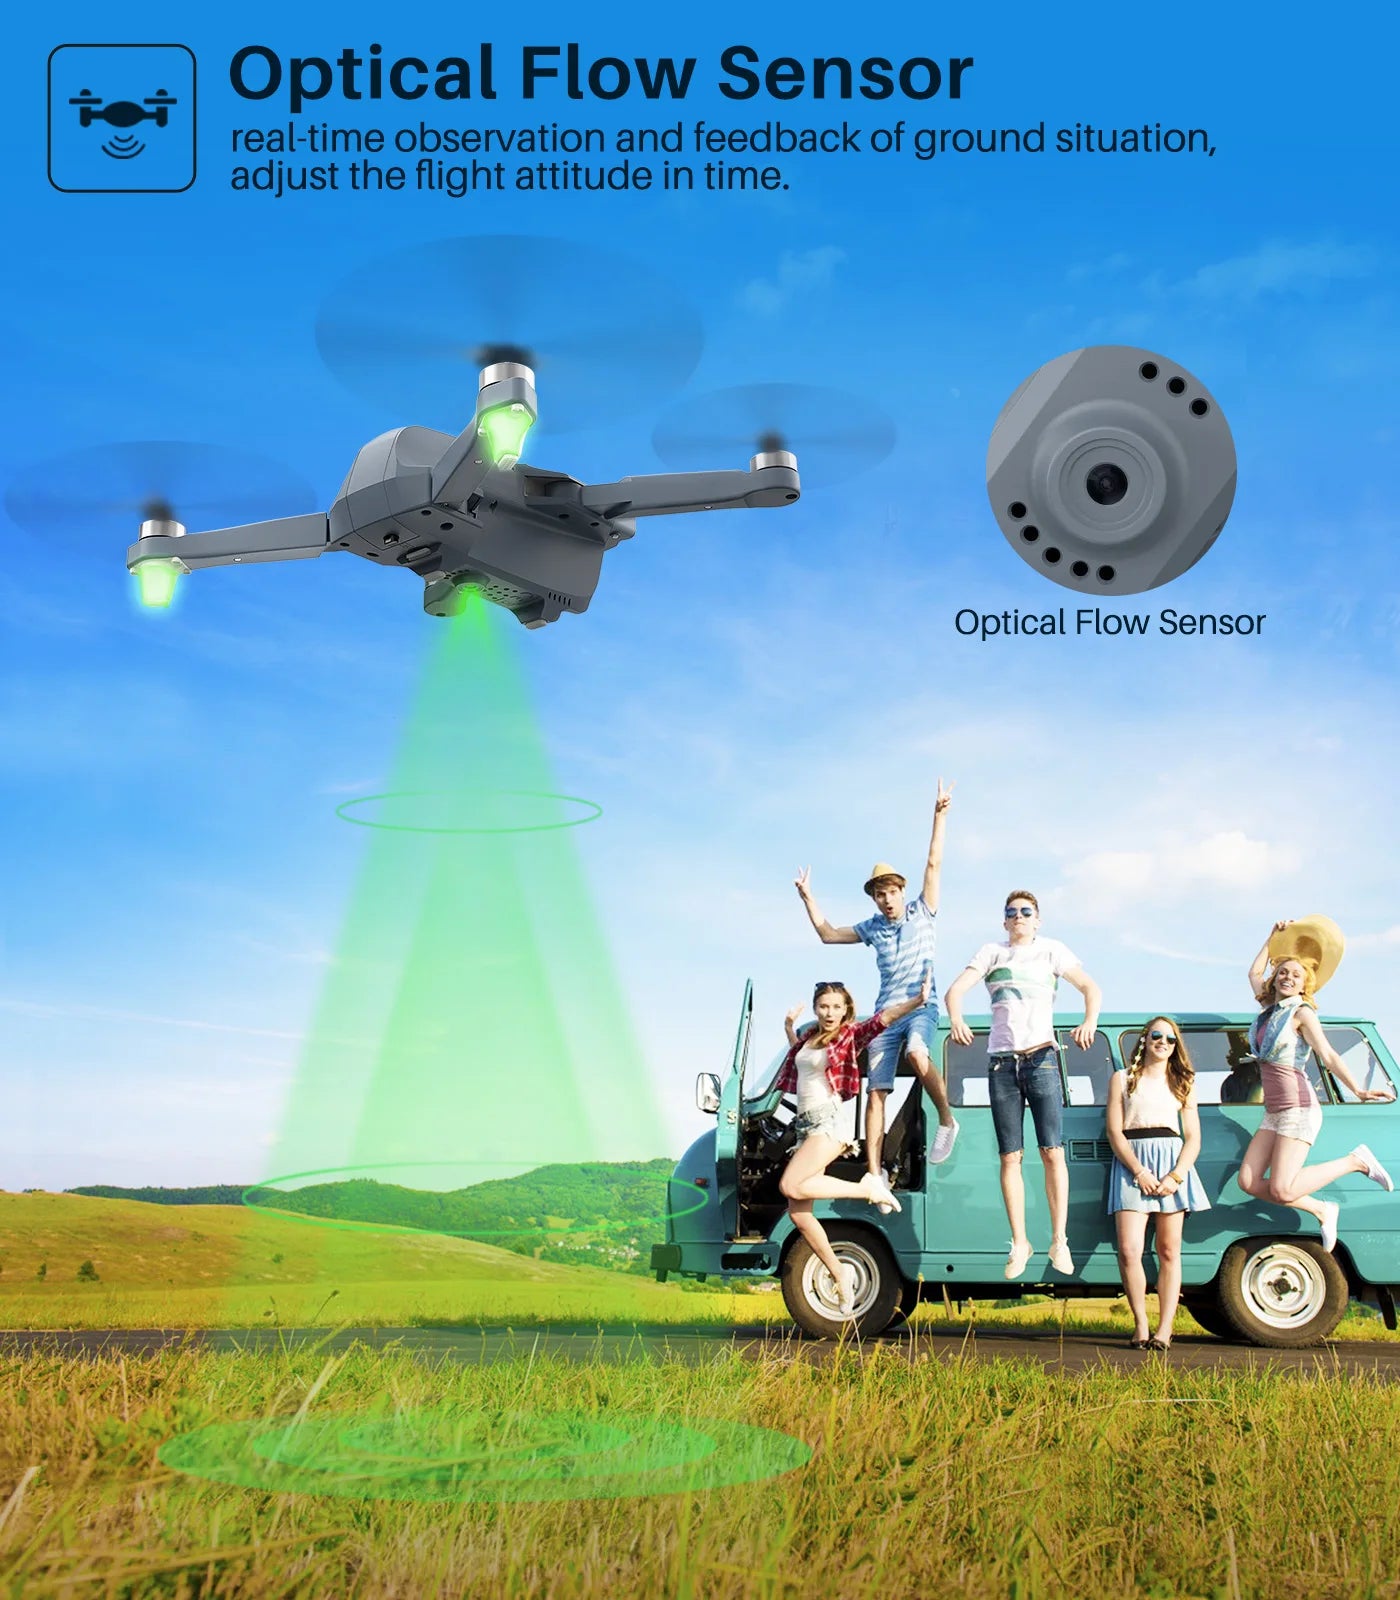 SYMA X500 Pro GPS Drone, Optical Flow Sensor real-time observation and feedback of ground situation . Opti